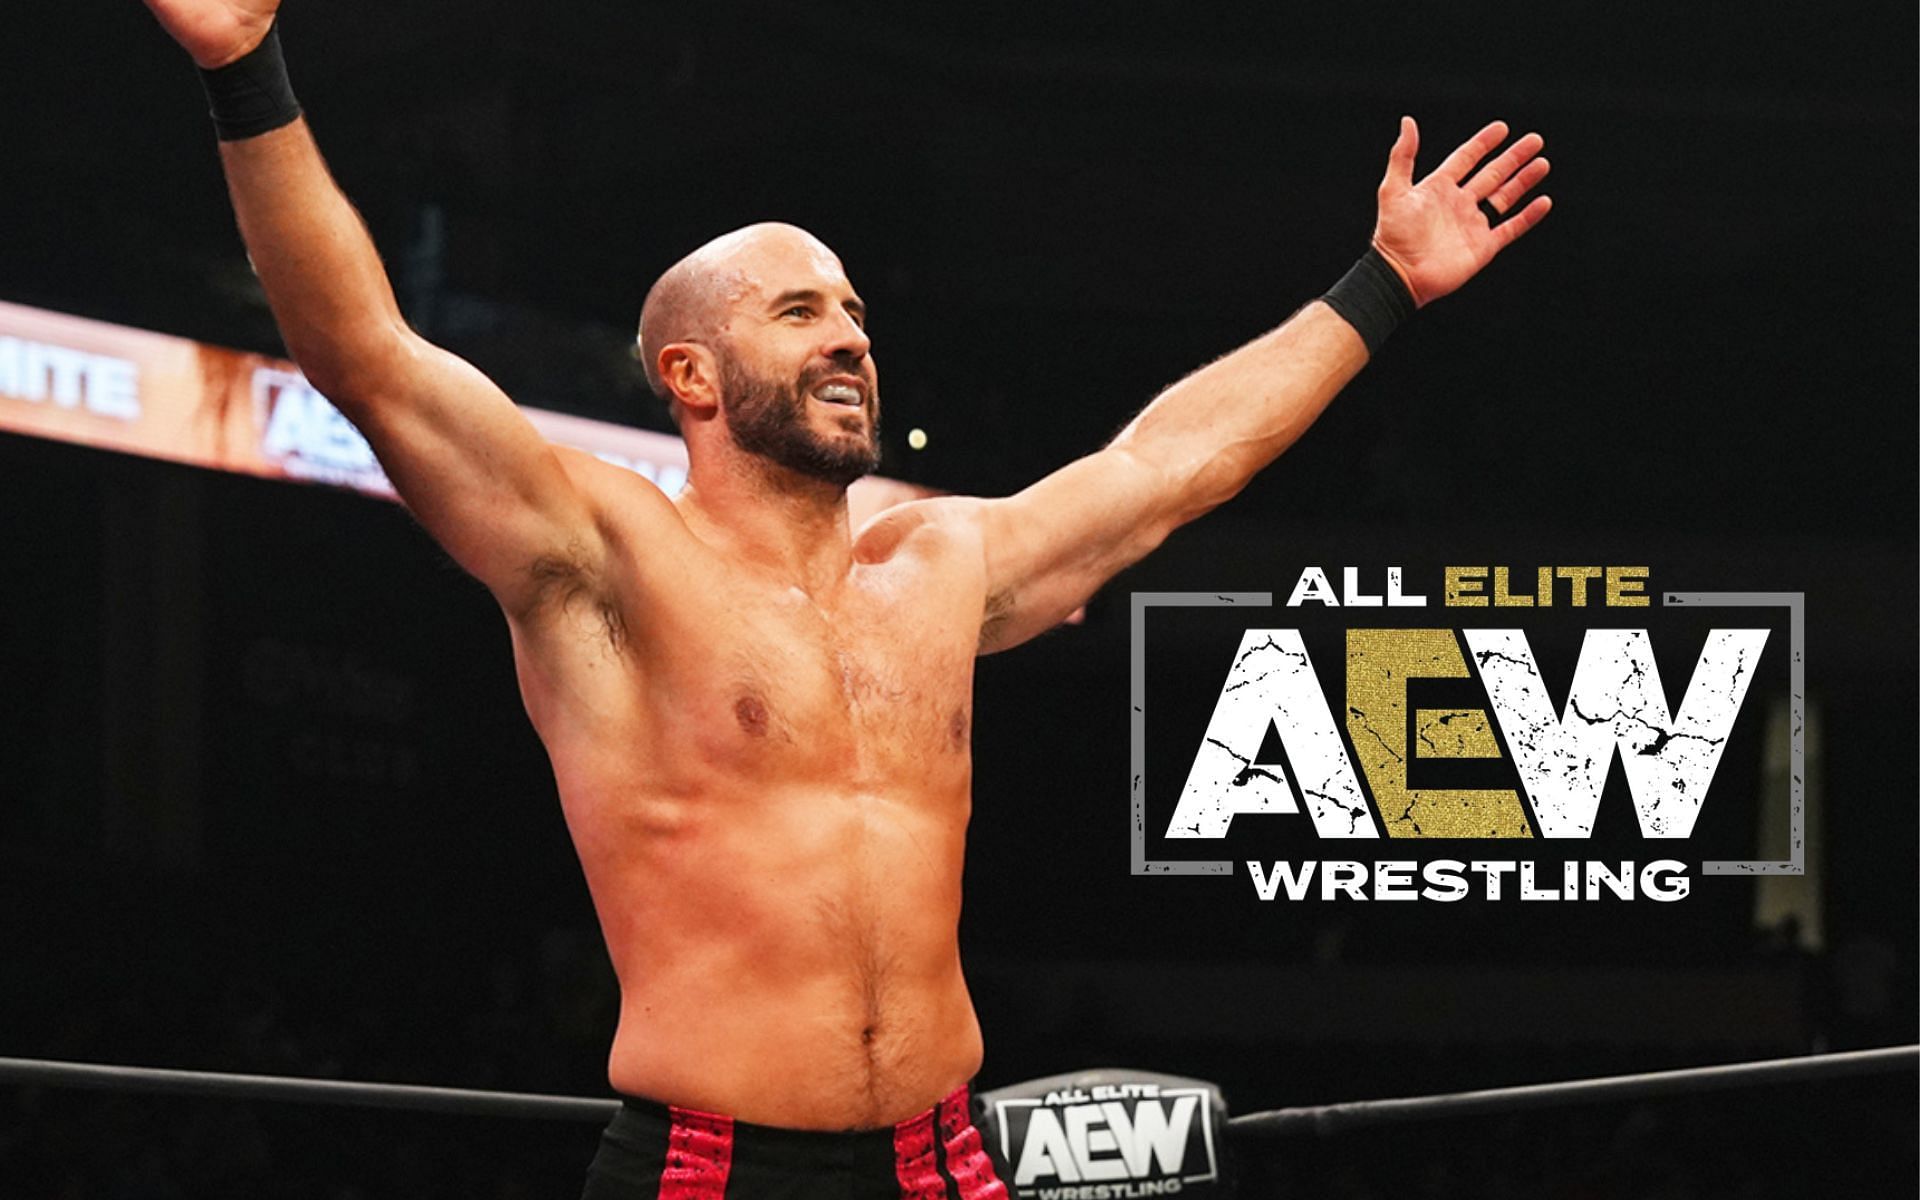 Claudio Castagnoli signed with AEW since June this year